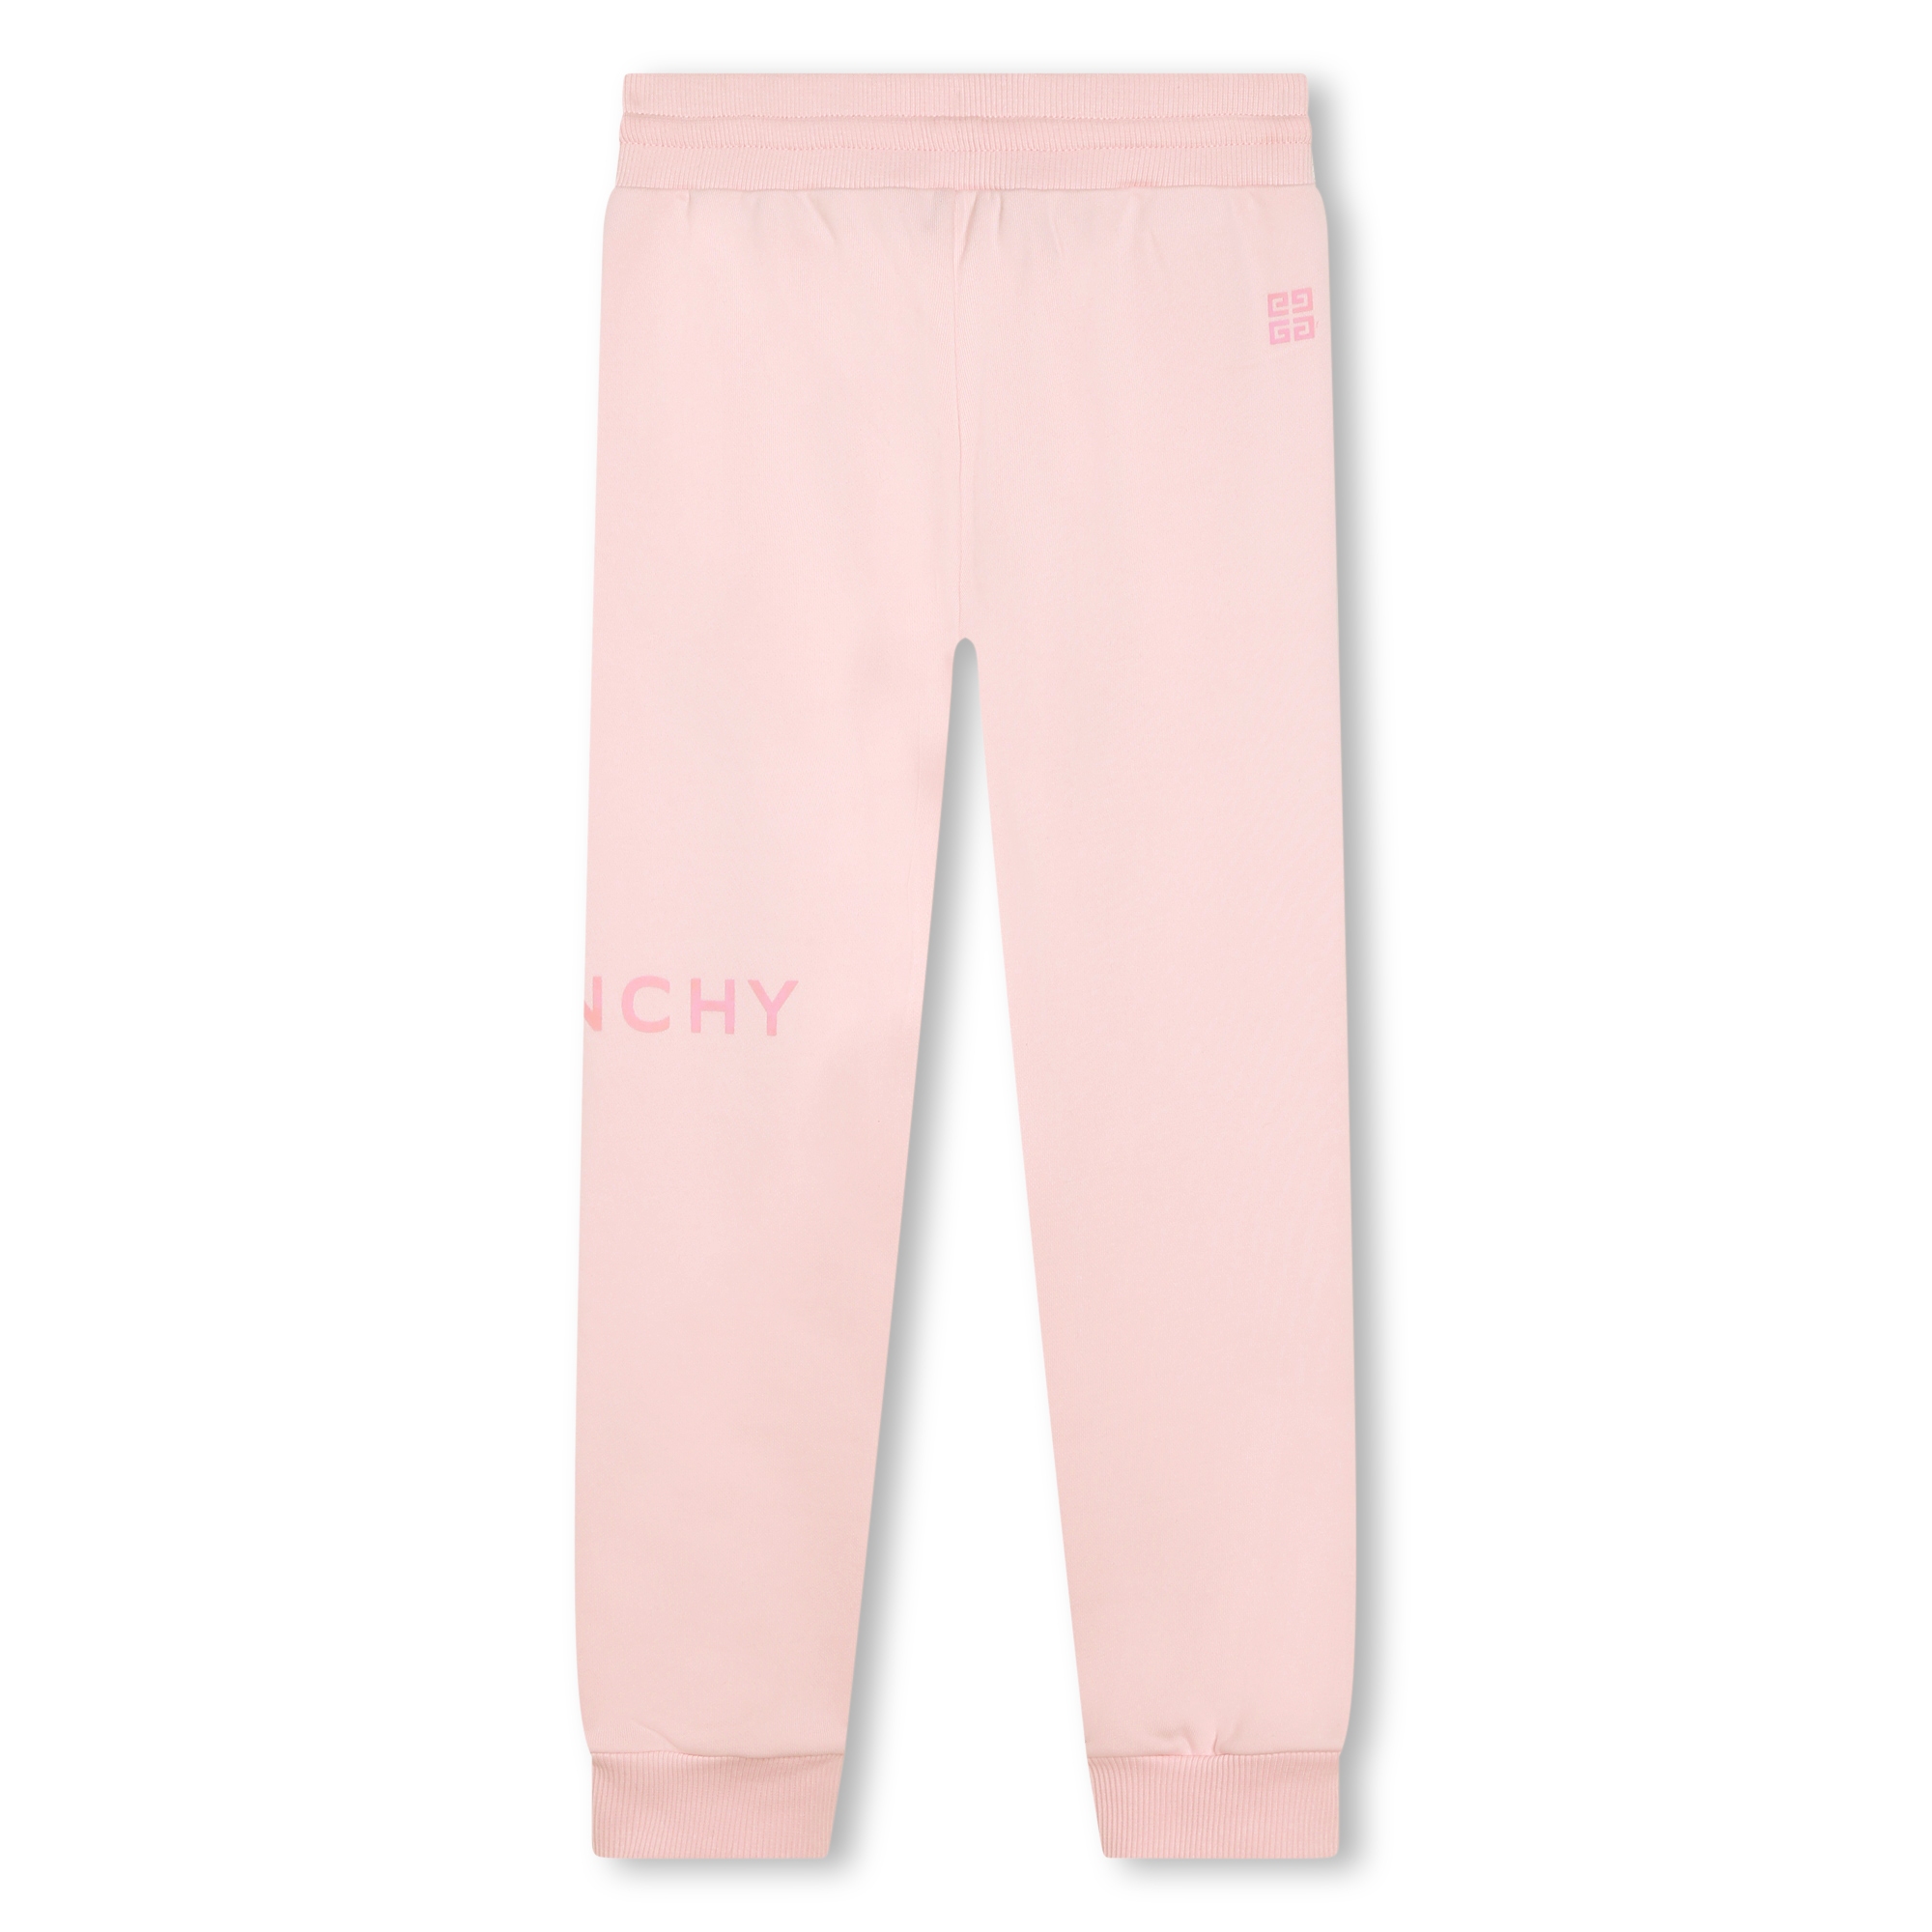 Jogging bottoms with logo GIVENCHY for GIRL